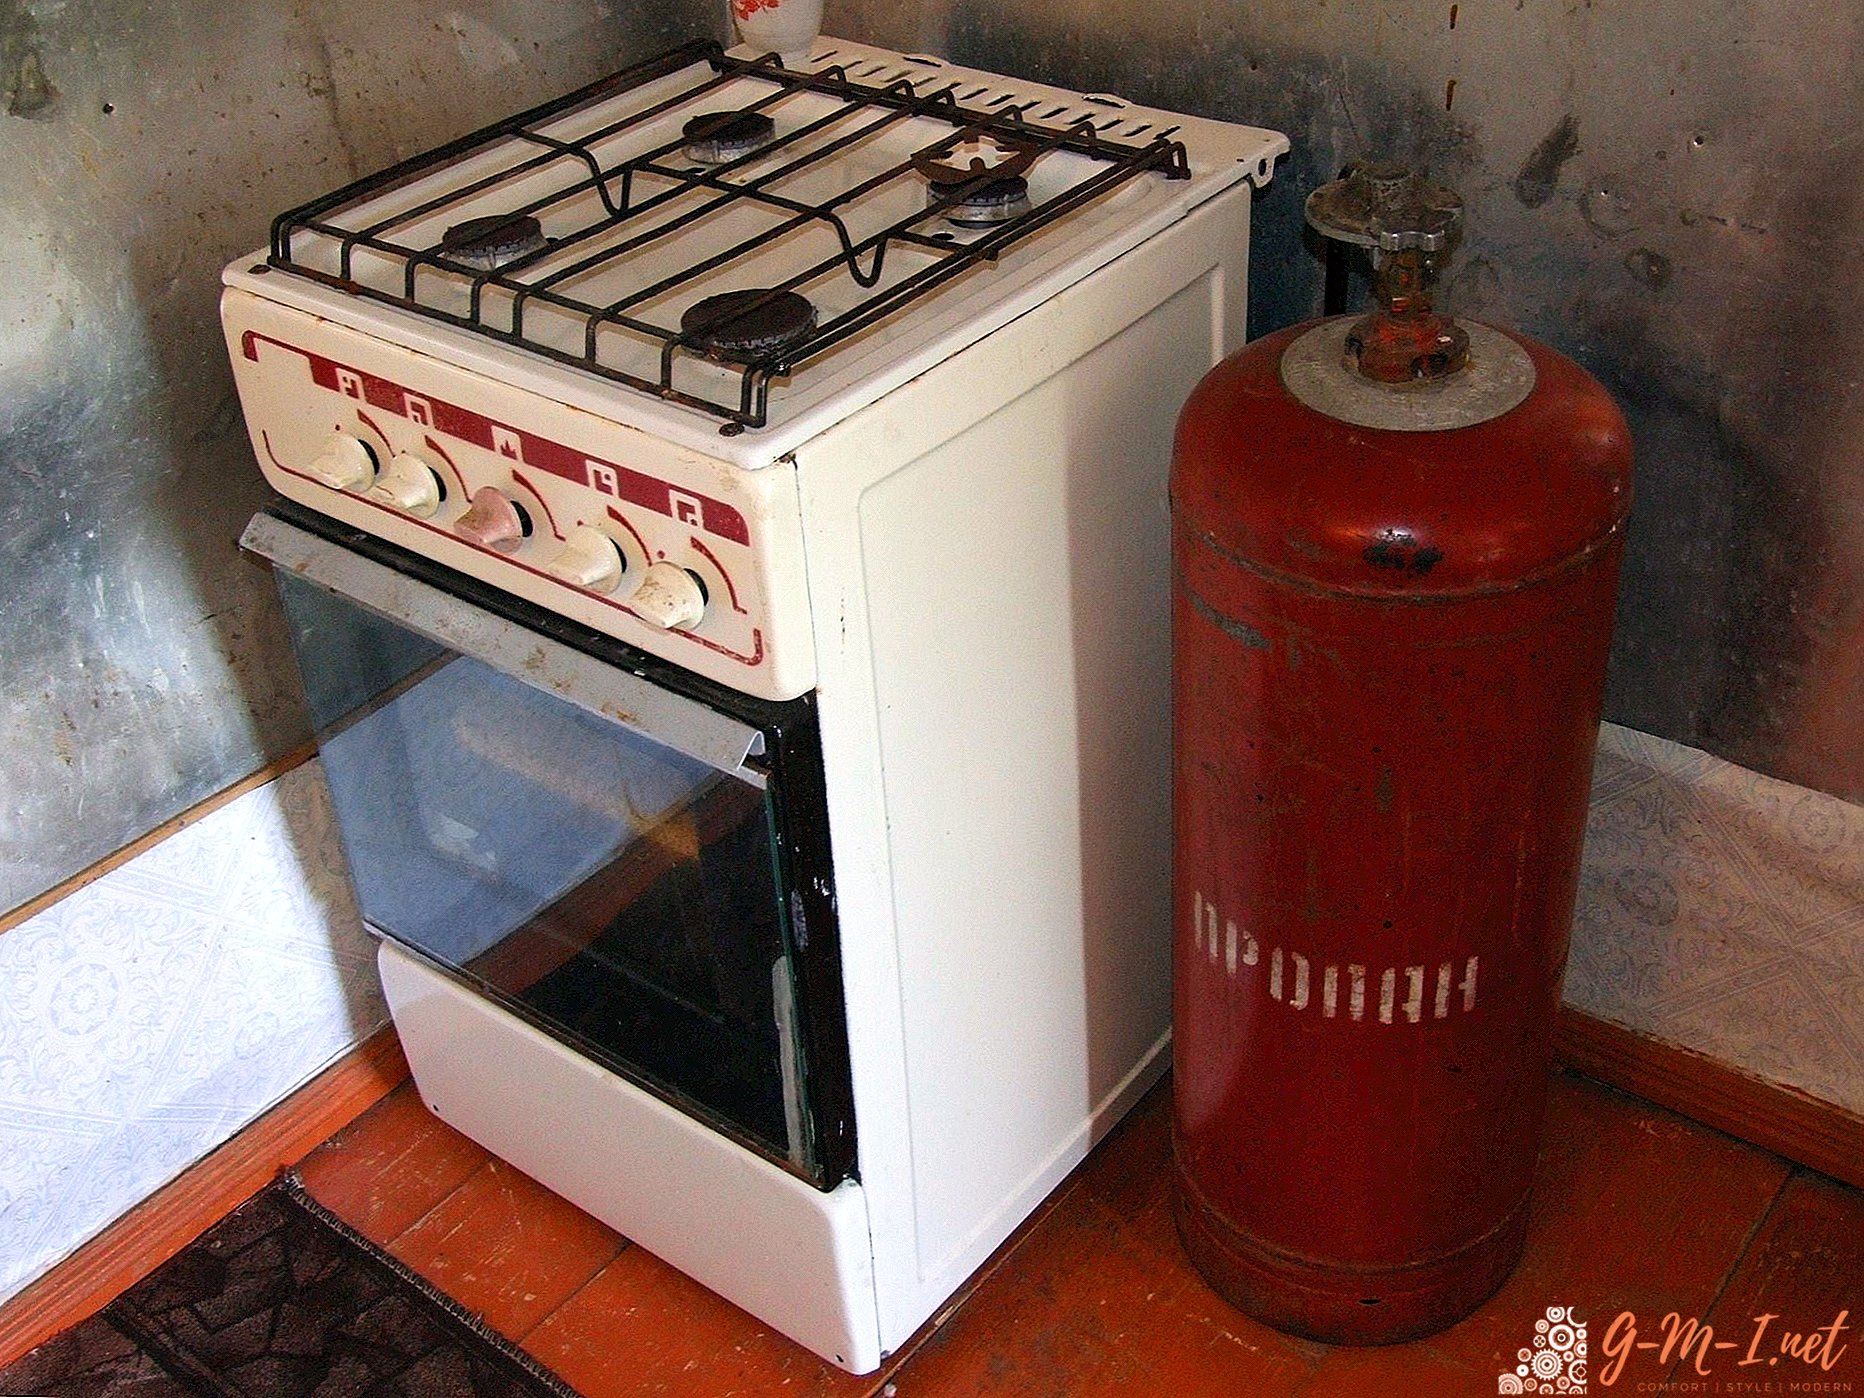 What gas in gas cylinders for a gas stove